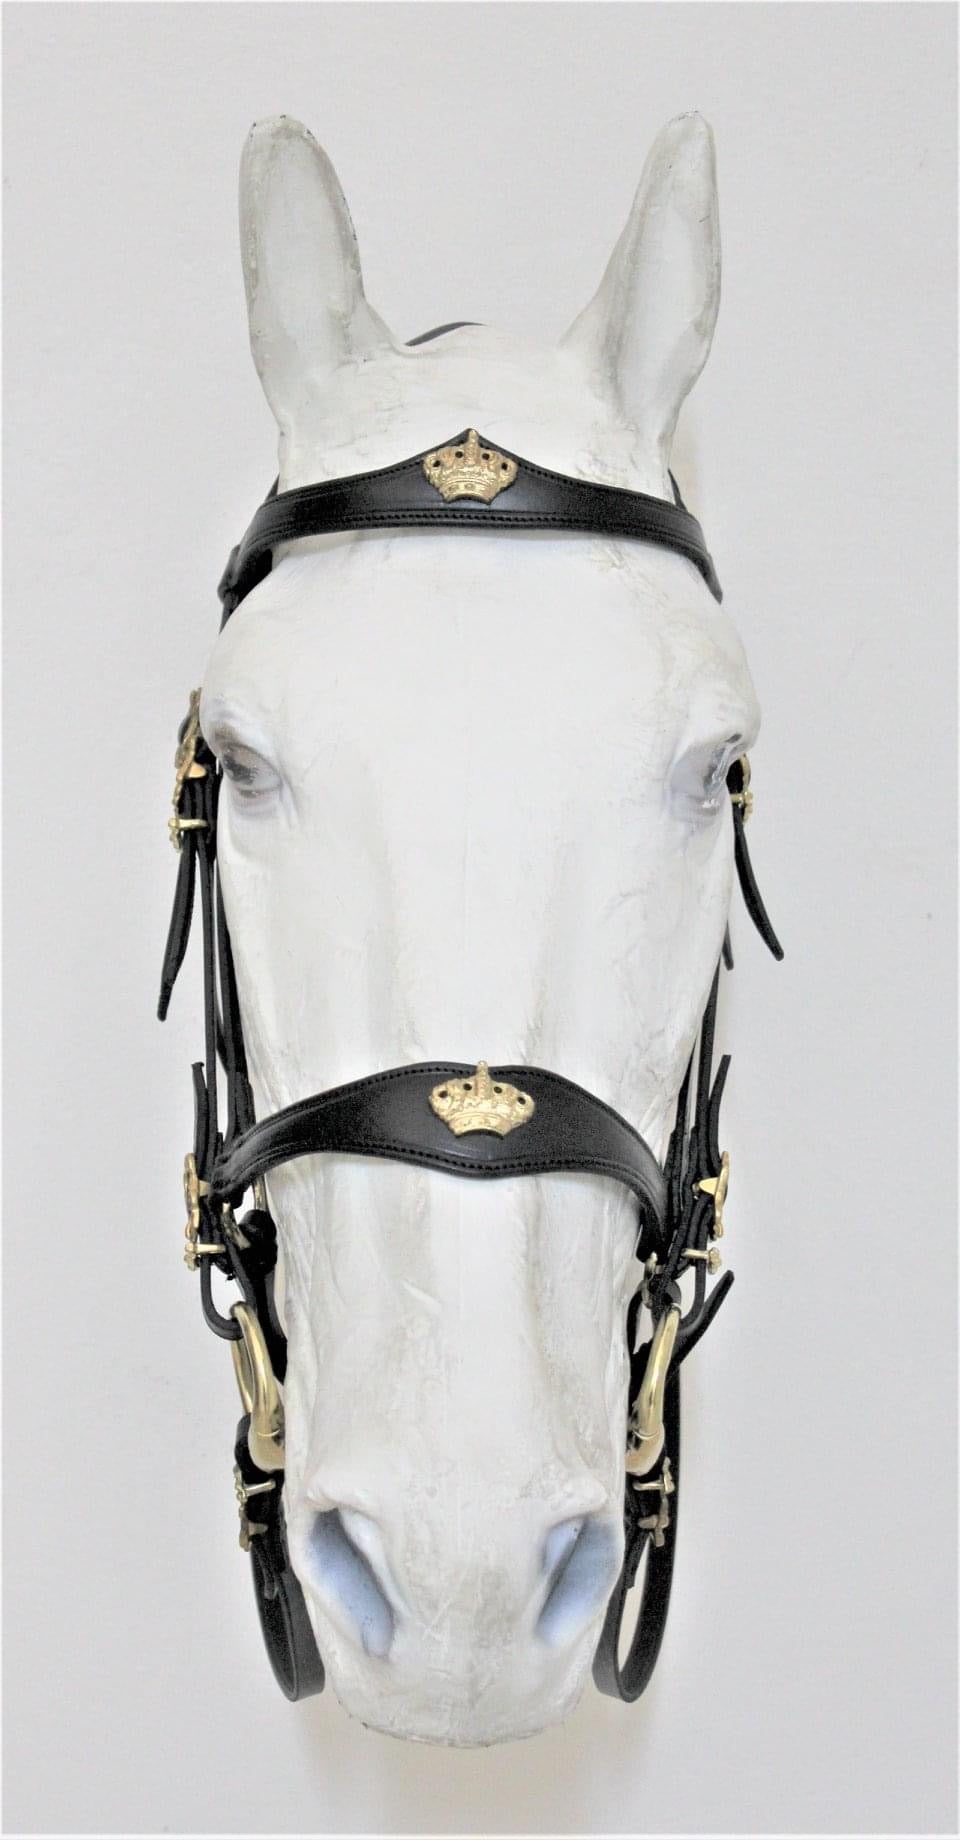 B0915 “Crown” single bridle by VMCS